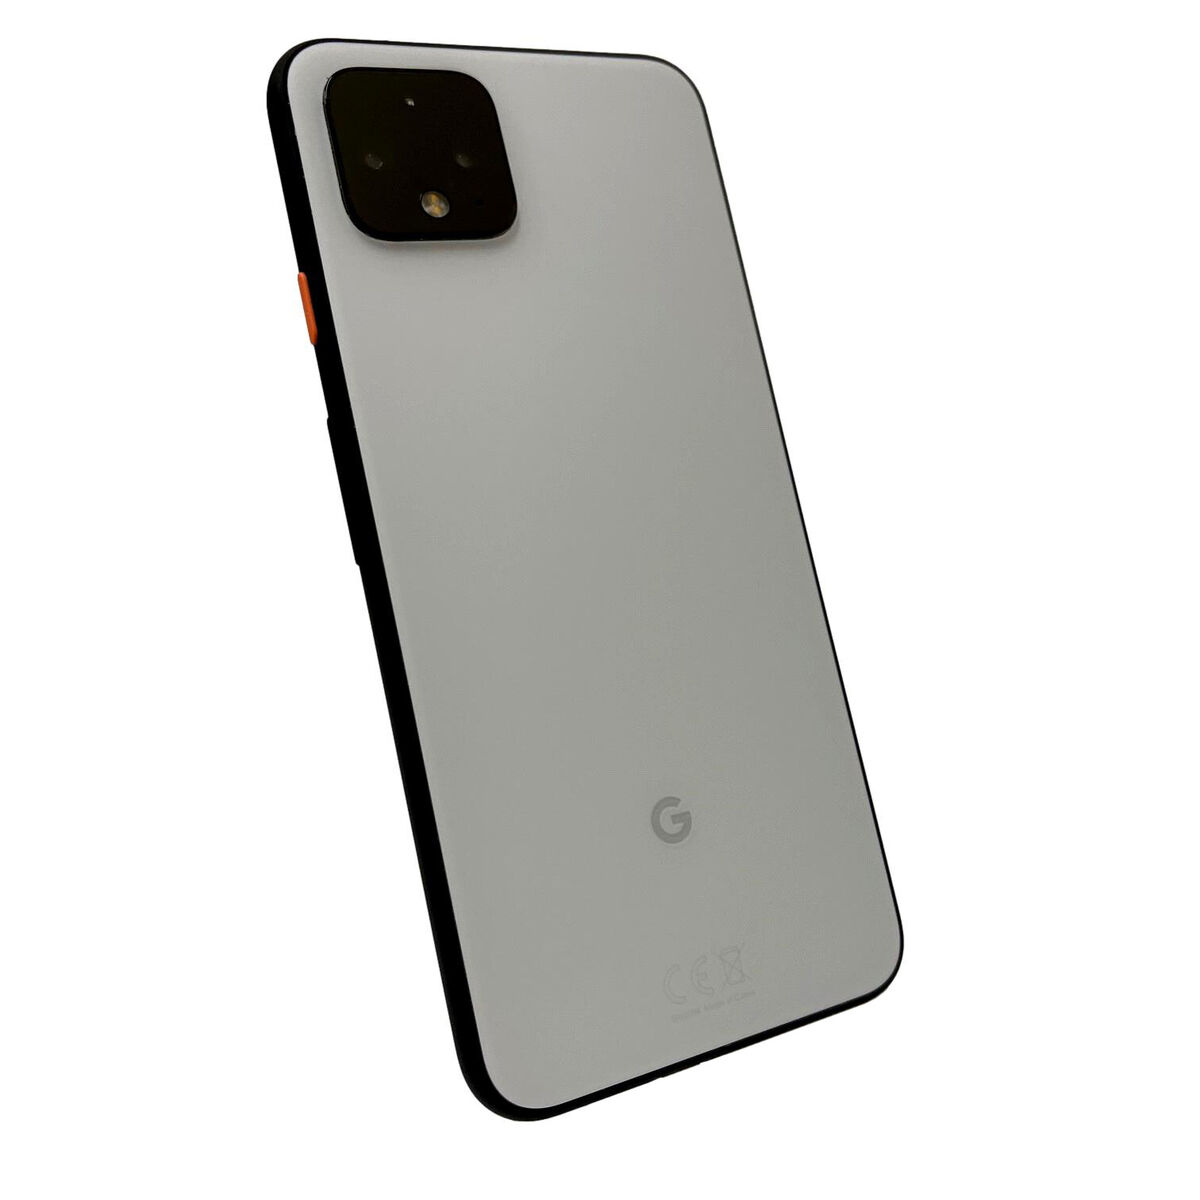 Google Pixel 4 Release Date And Launch Details